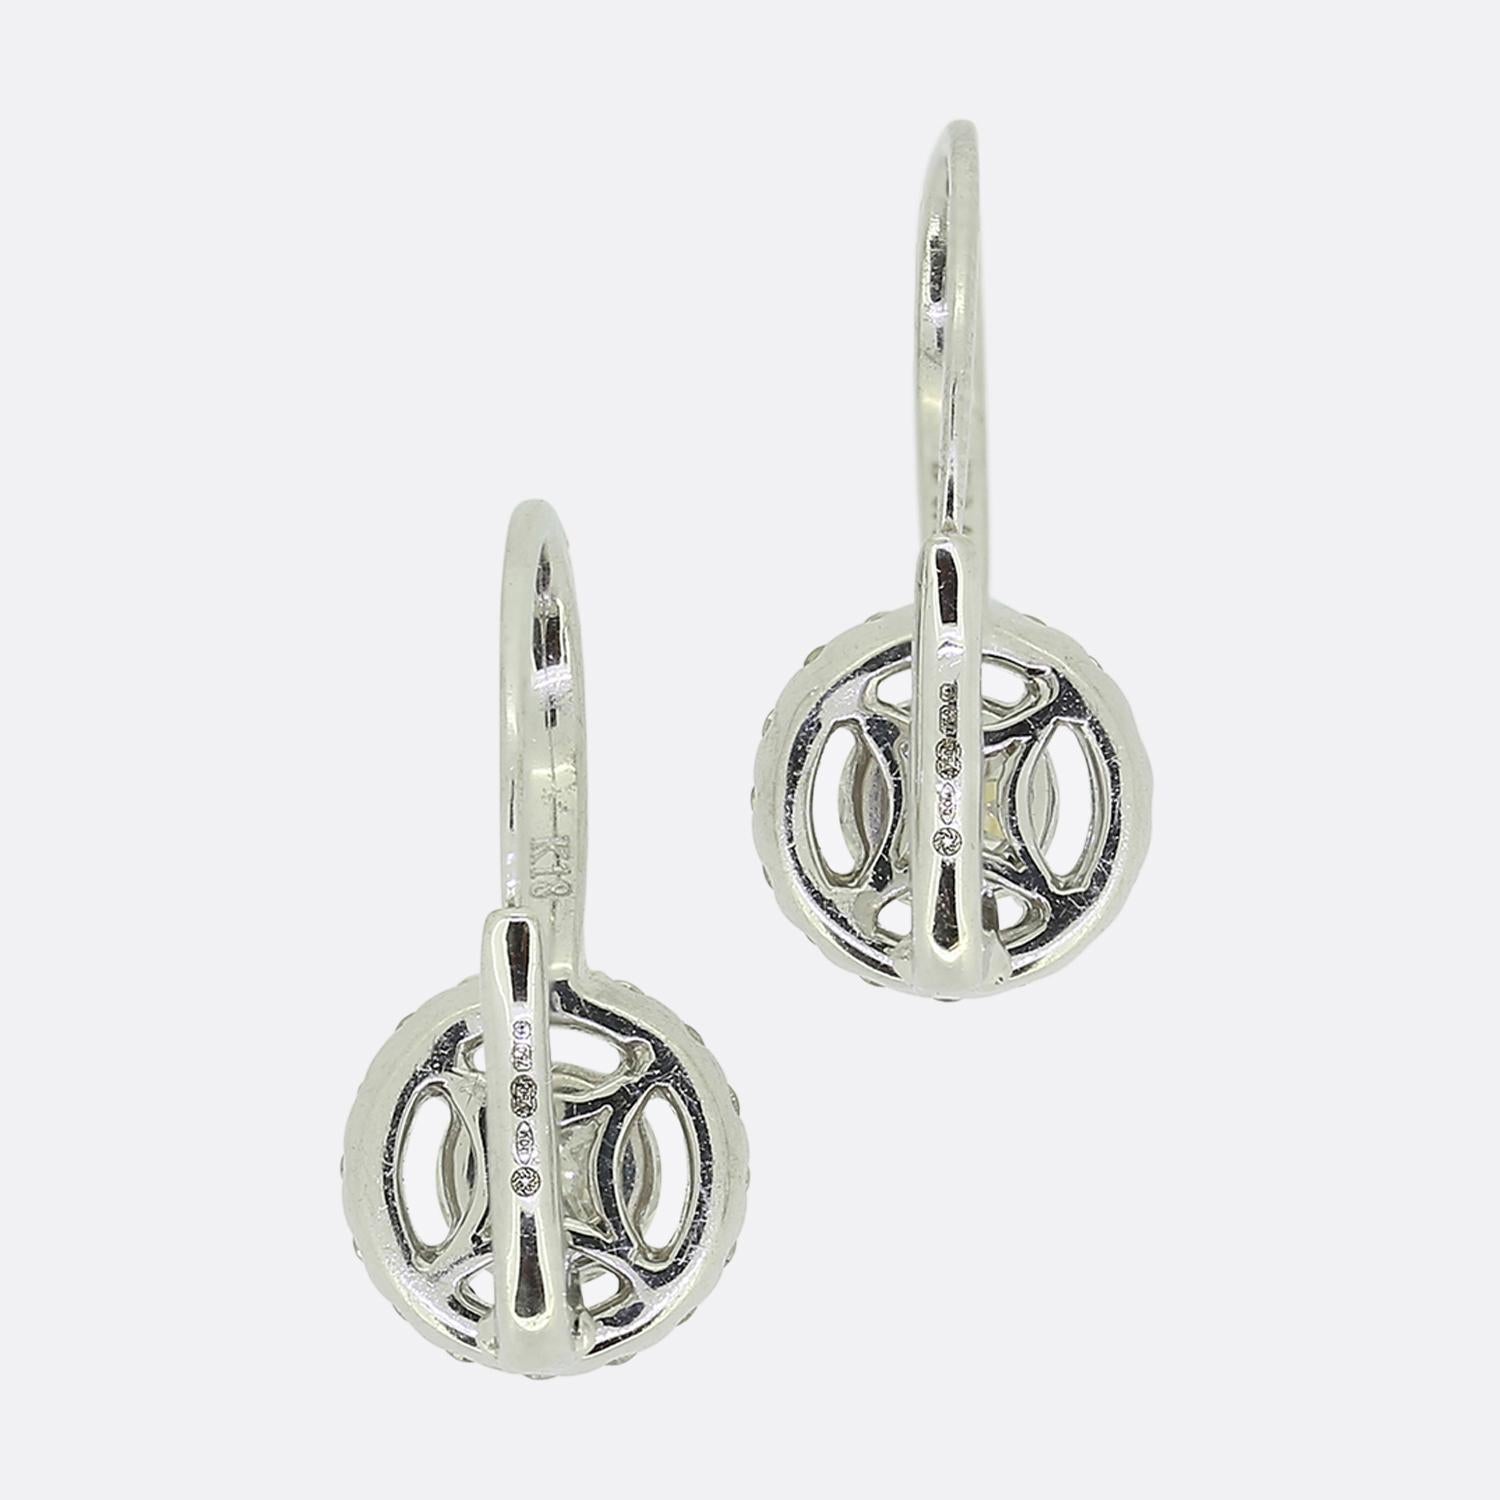 Here we have a wonderful pair of diamond drop earrings. Each identical piece has been crafted from 18ct white gold and focally showcases a single 0.40 carat round brilliant cut diamond at the centre. This principal stone is then surrounded by a halo